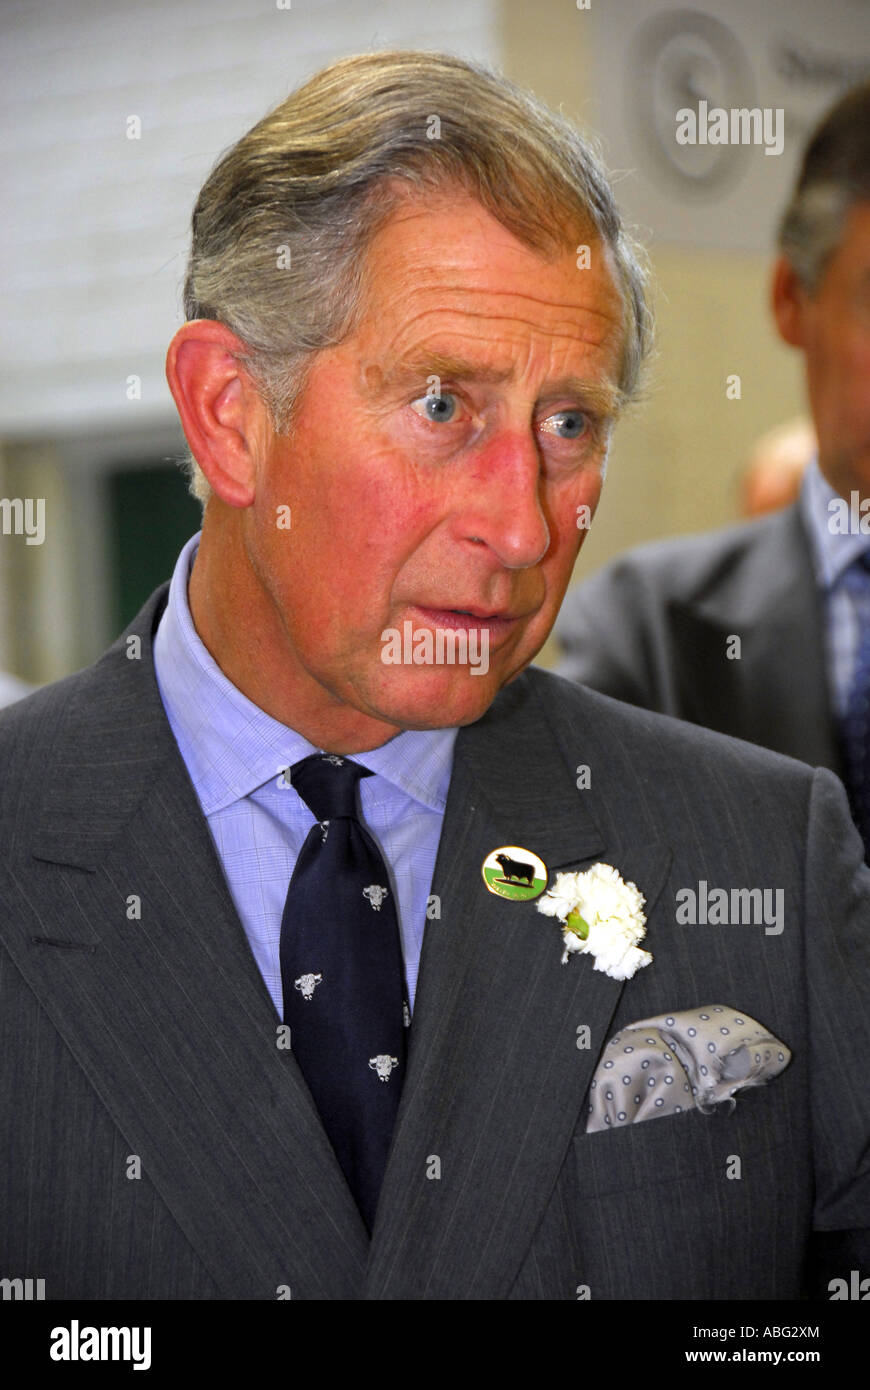 Thoughtful portrait of HRH Prince Charles - Prince of Wales. Stock Photo